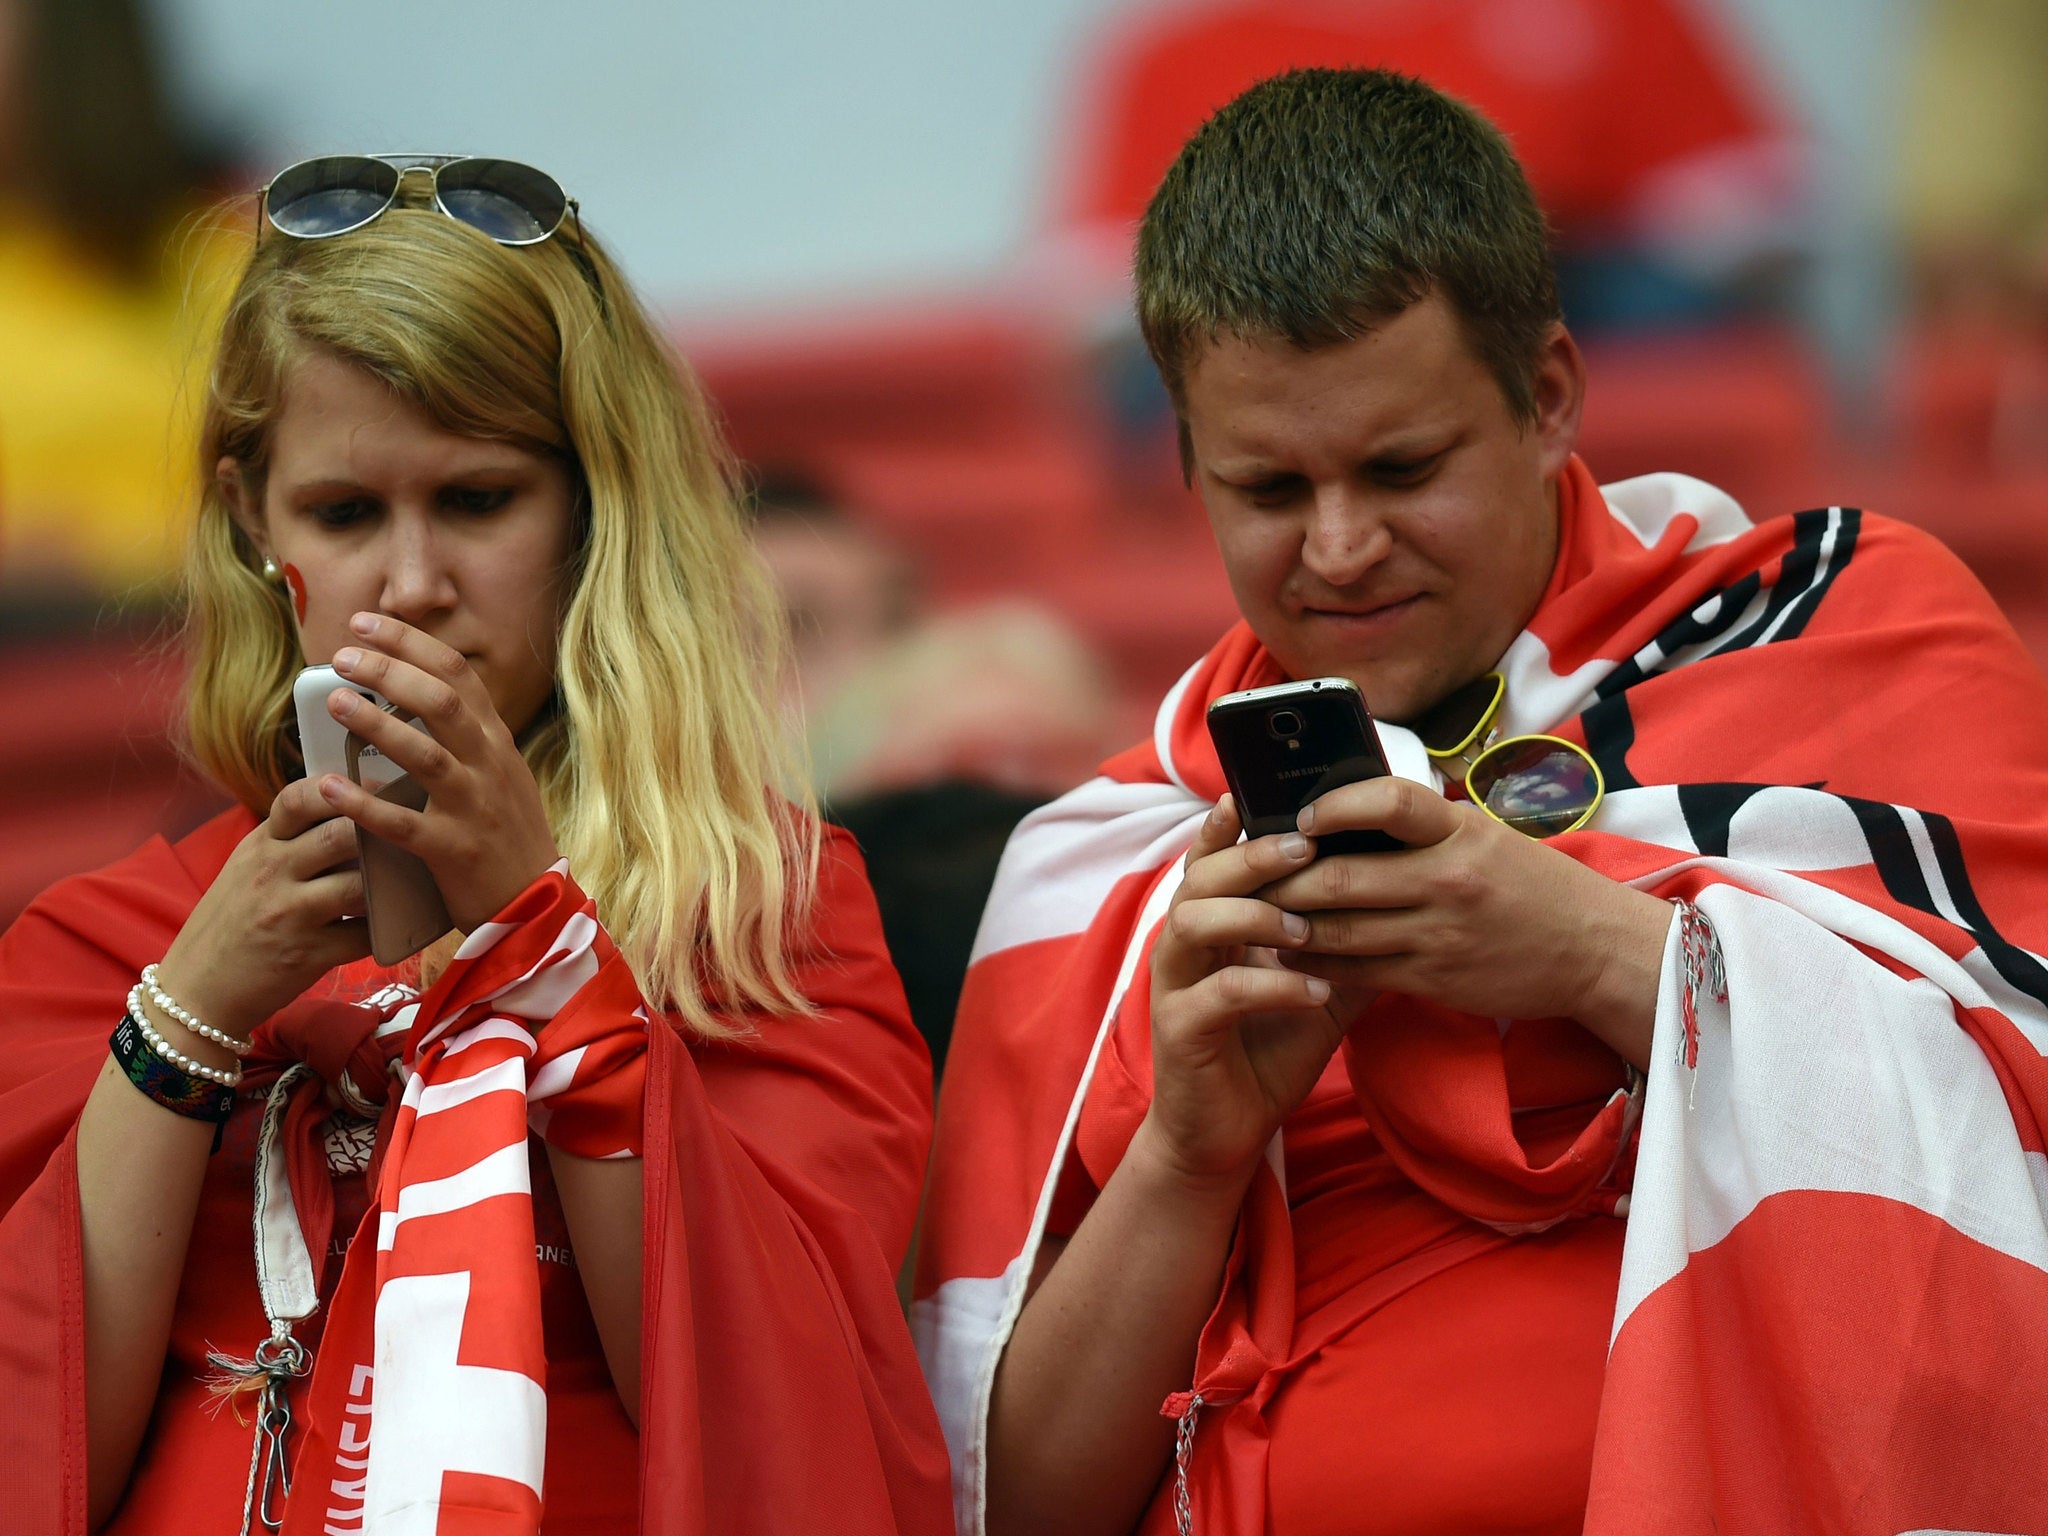 Swiss fans check the smartphones prior to the match between Switzerland and Ecuador in Brasilia during the 2014 World Cup on June 15, 2014.